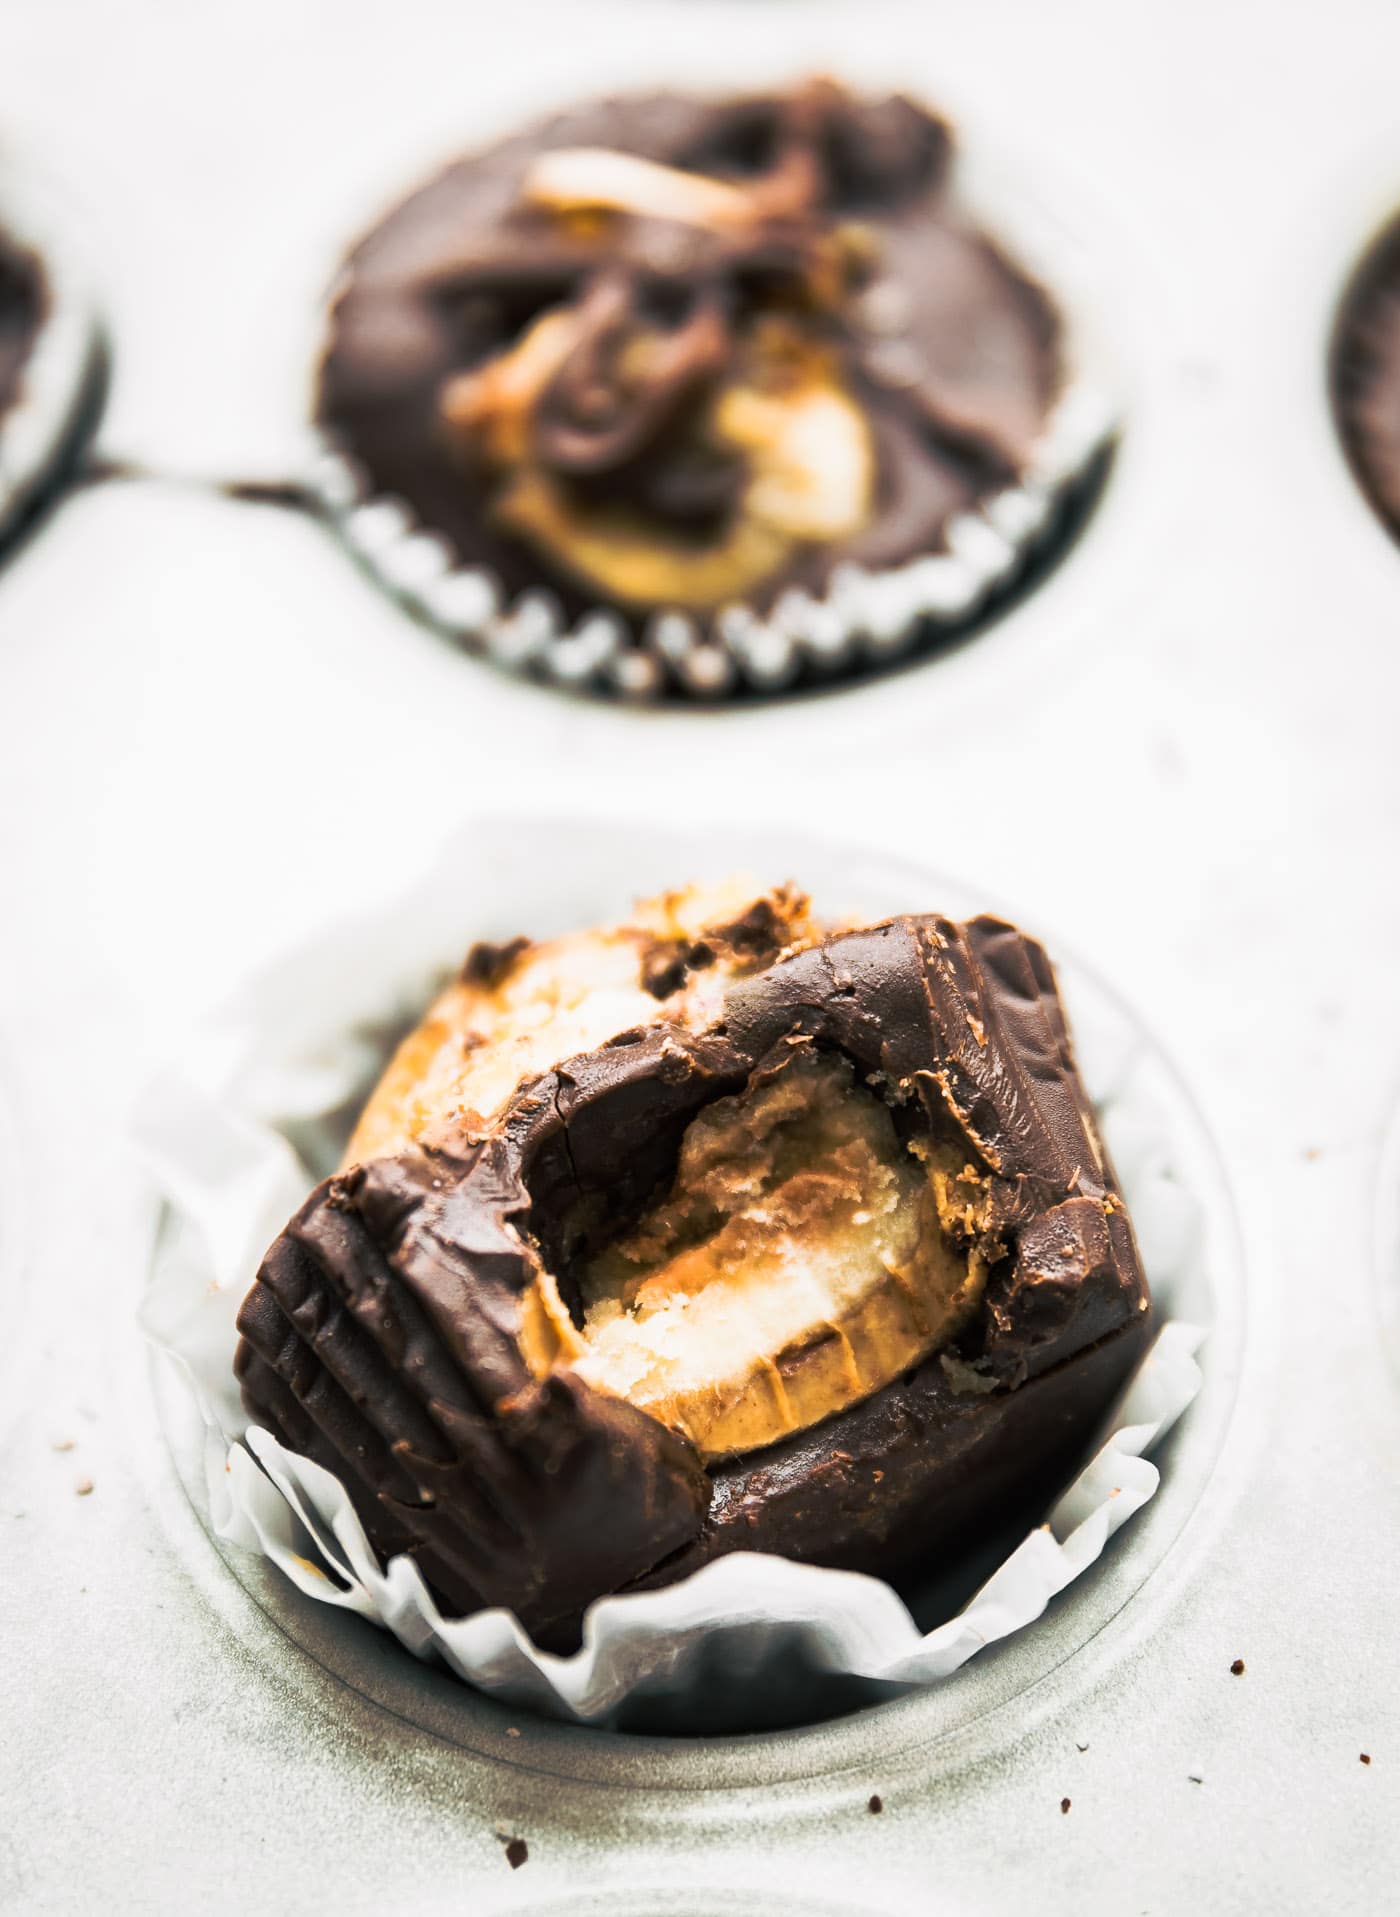 EASY Dark chocolate almond butter cups with caramelized bananas in the middle and sliced on top. .